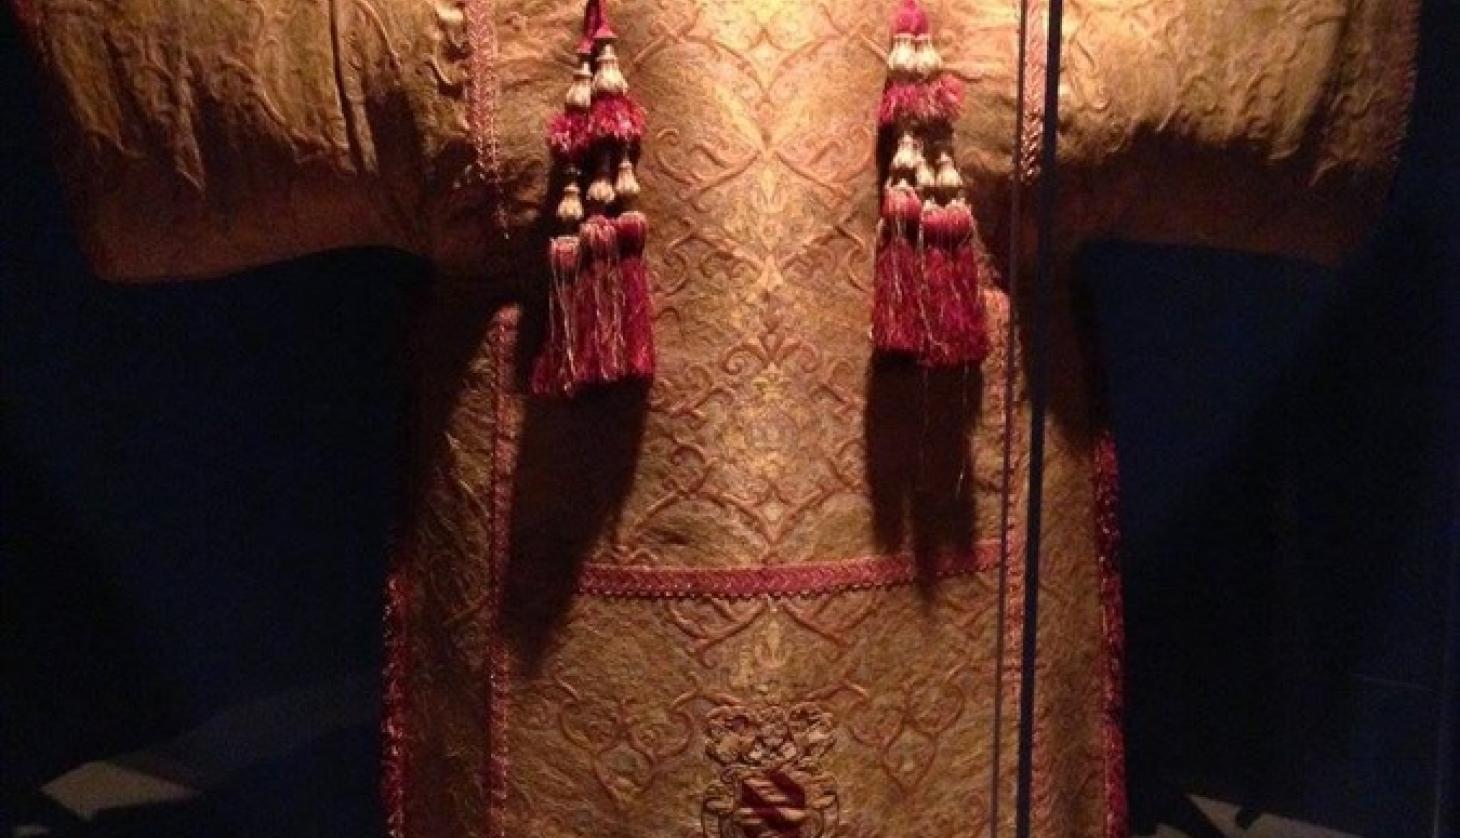  Ancient Clothing in Museum